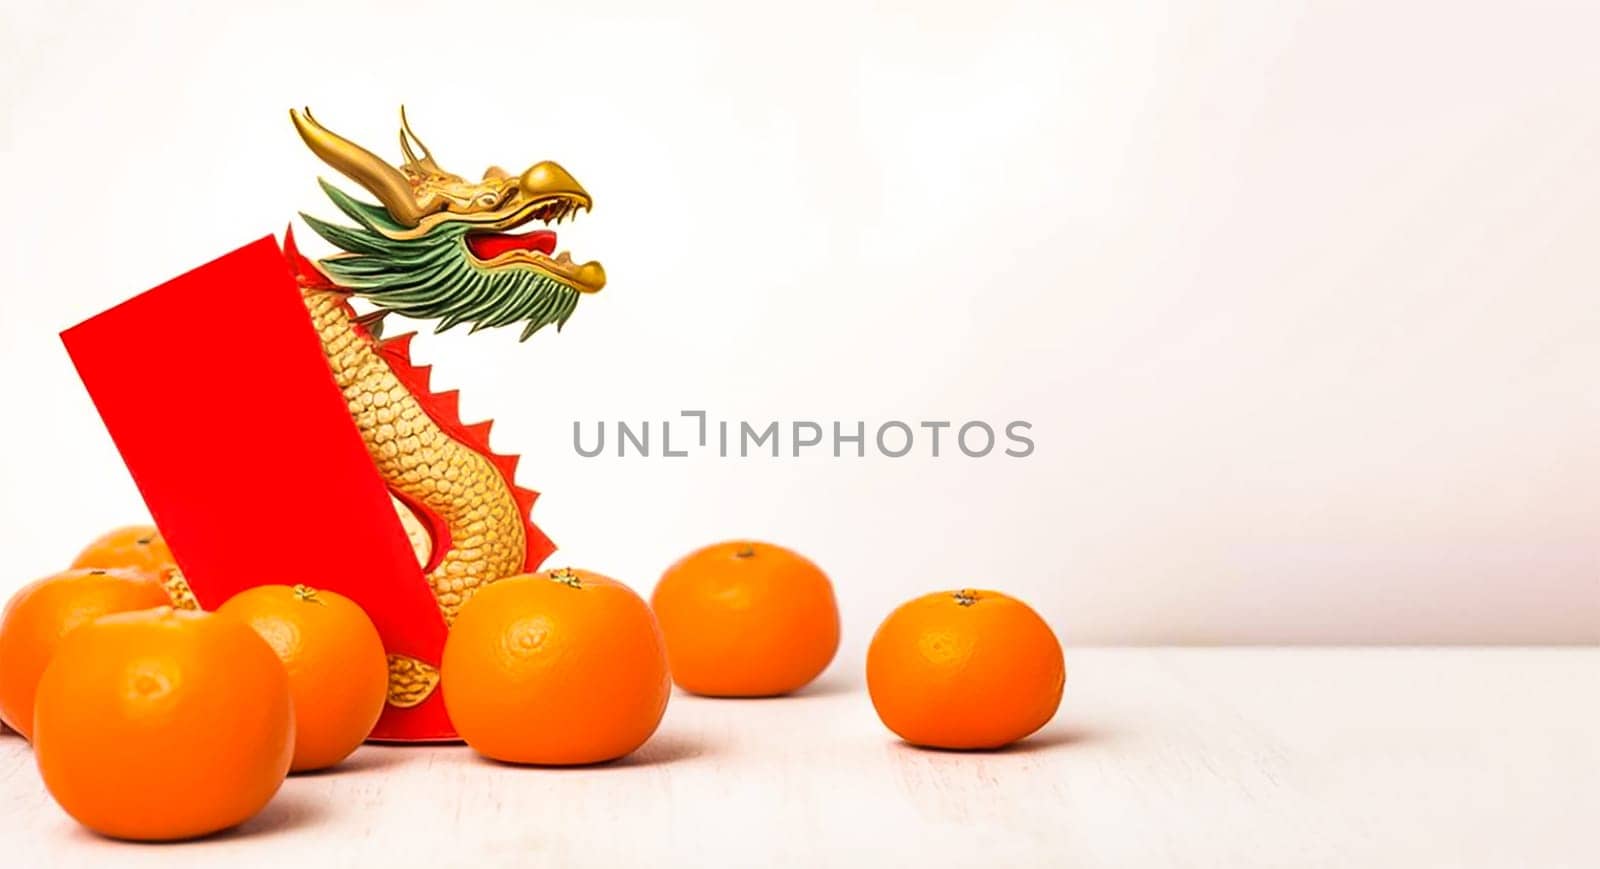 hongbao Chinese money envelope, tangerines and a dragon on a light background, place for text on the right, banner by claire_lucia